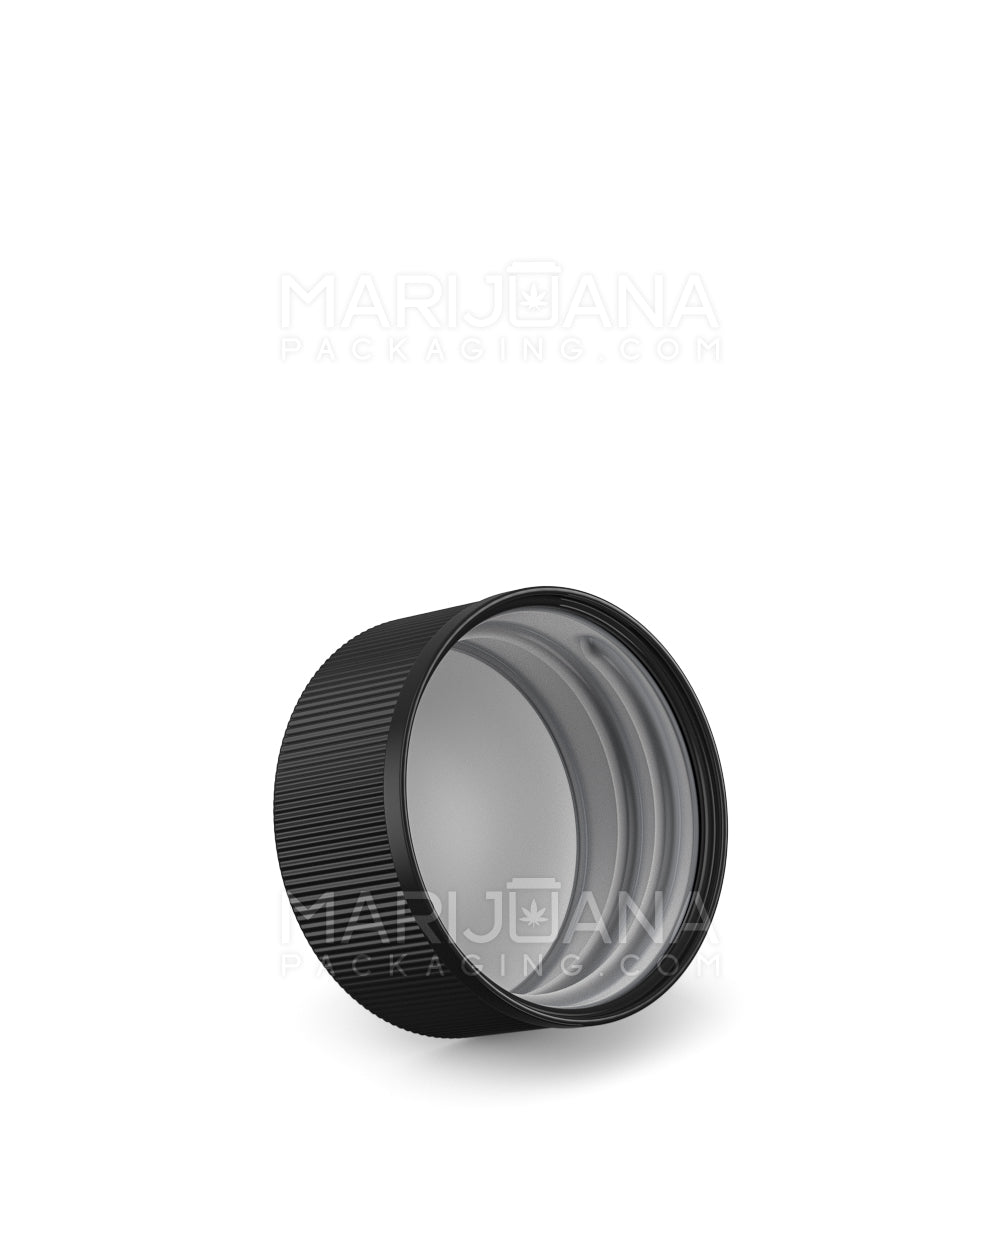 Child Resistant | Ribbed Push Down & Turn Plastic Caps w/ Foam Liner | 28mm - Glossy Black - 504 Count - 2